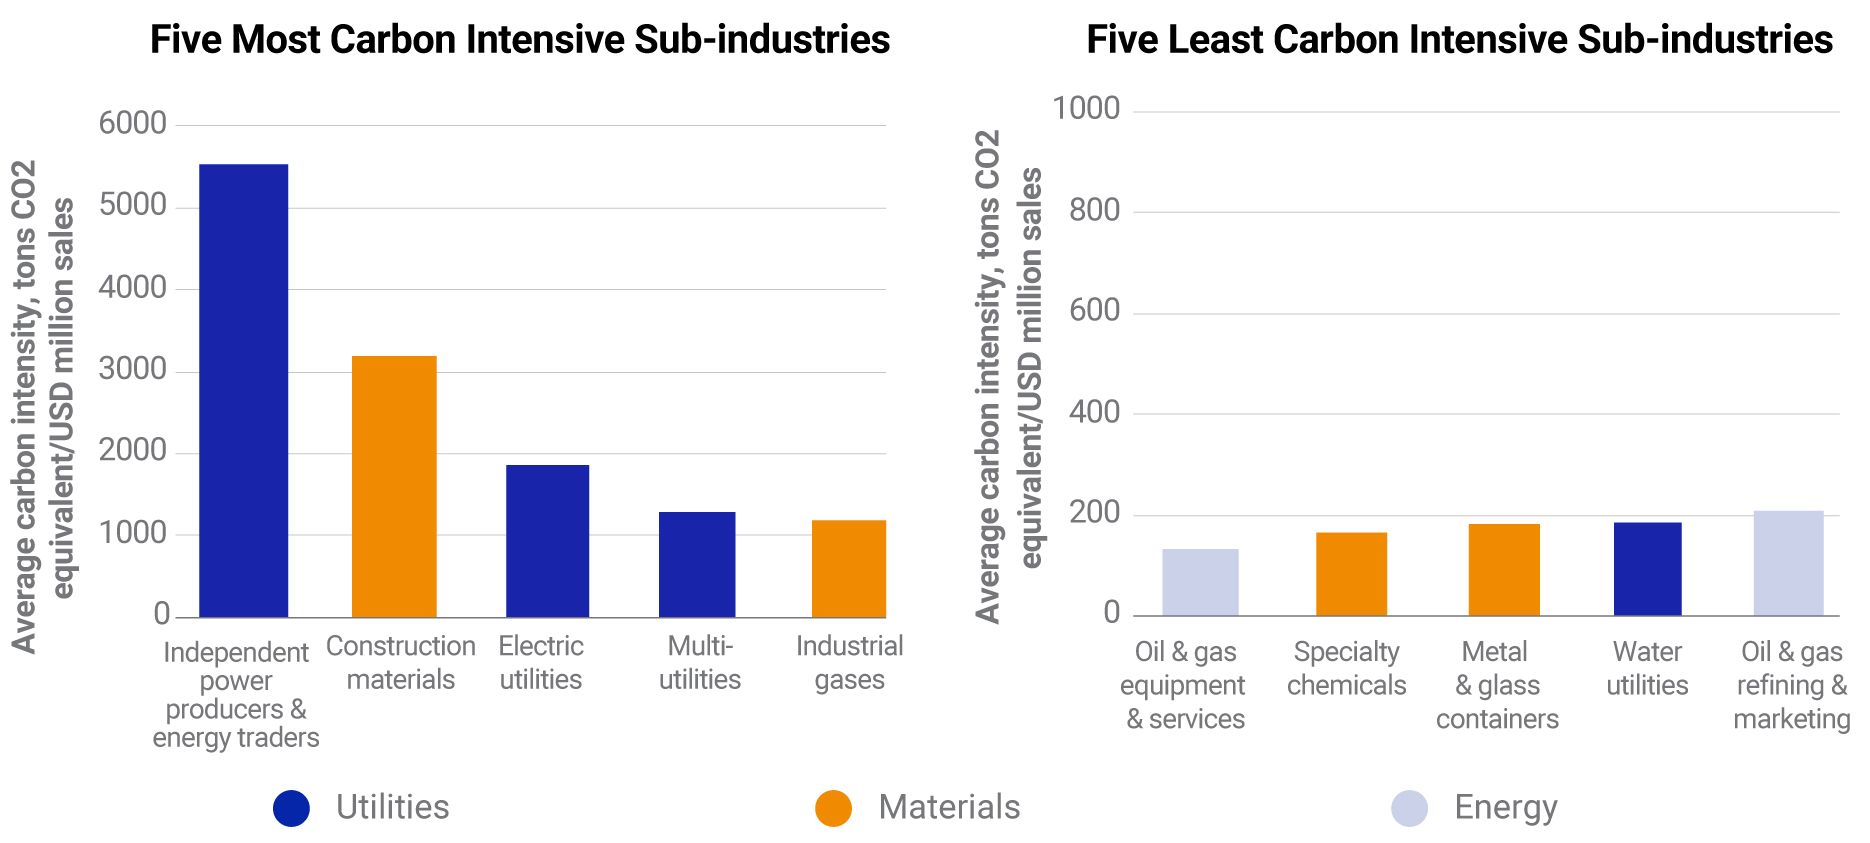 Utilities sub-industries were more carbon-intensive than energy or materials